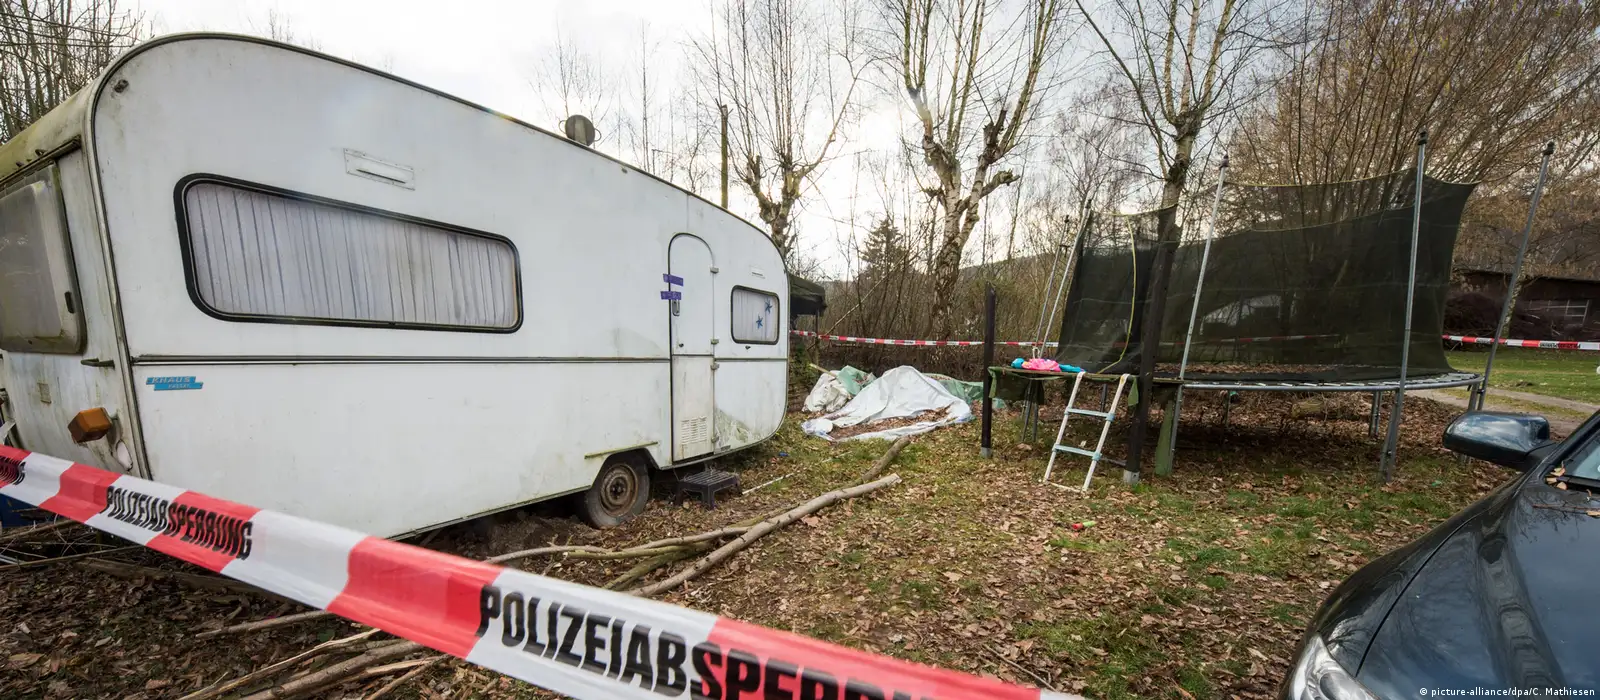 Smallsexvideo - Child abuse at campsite: How authorities failed the victims â€“ DW â€“  09/05/2019